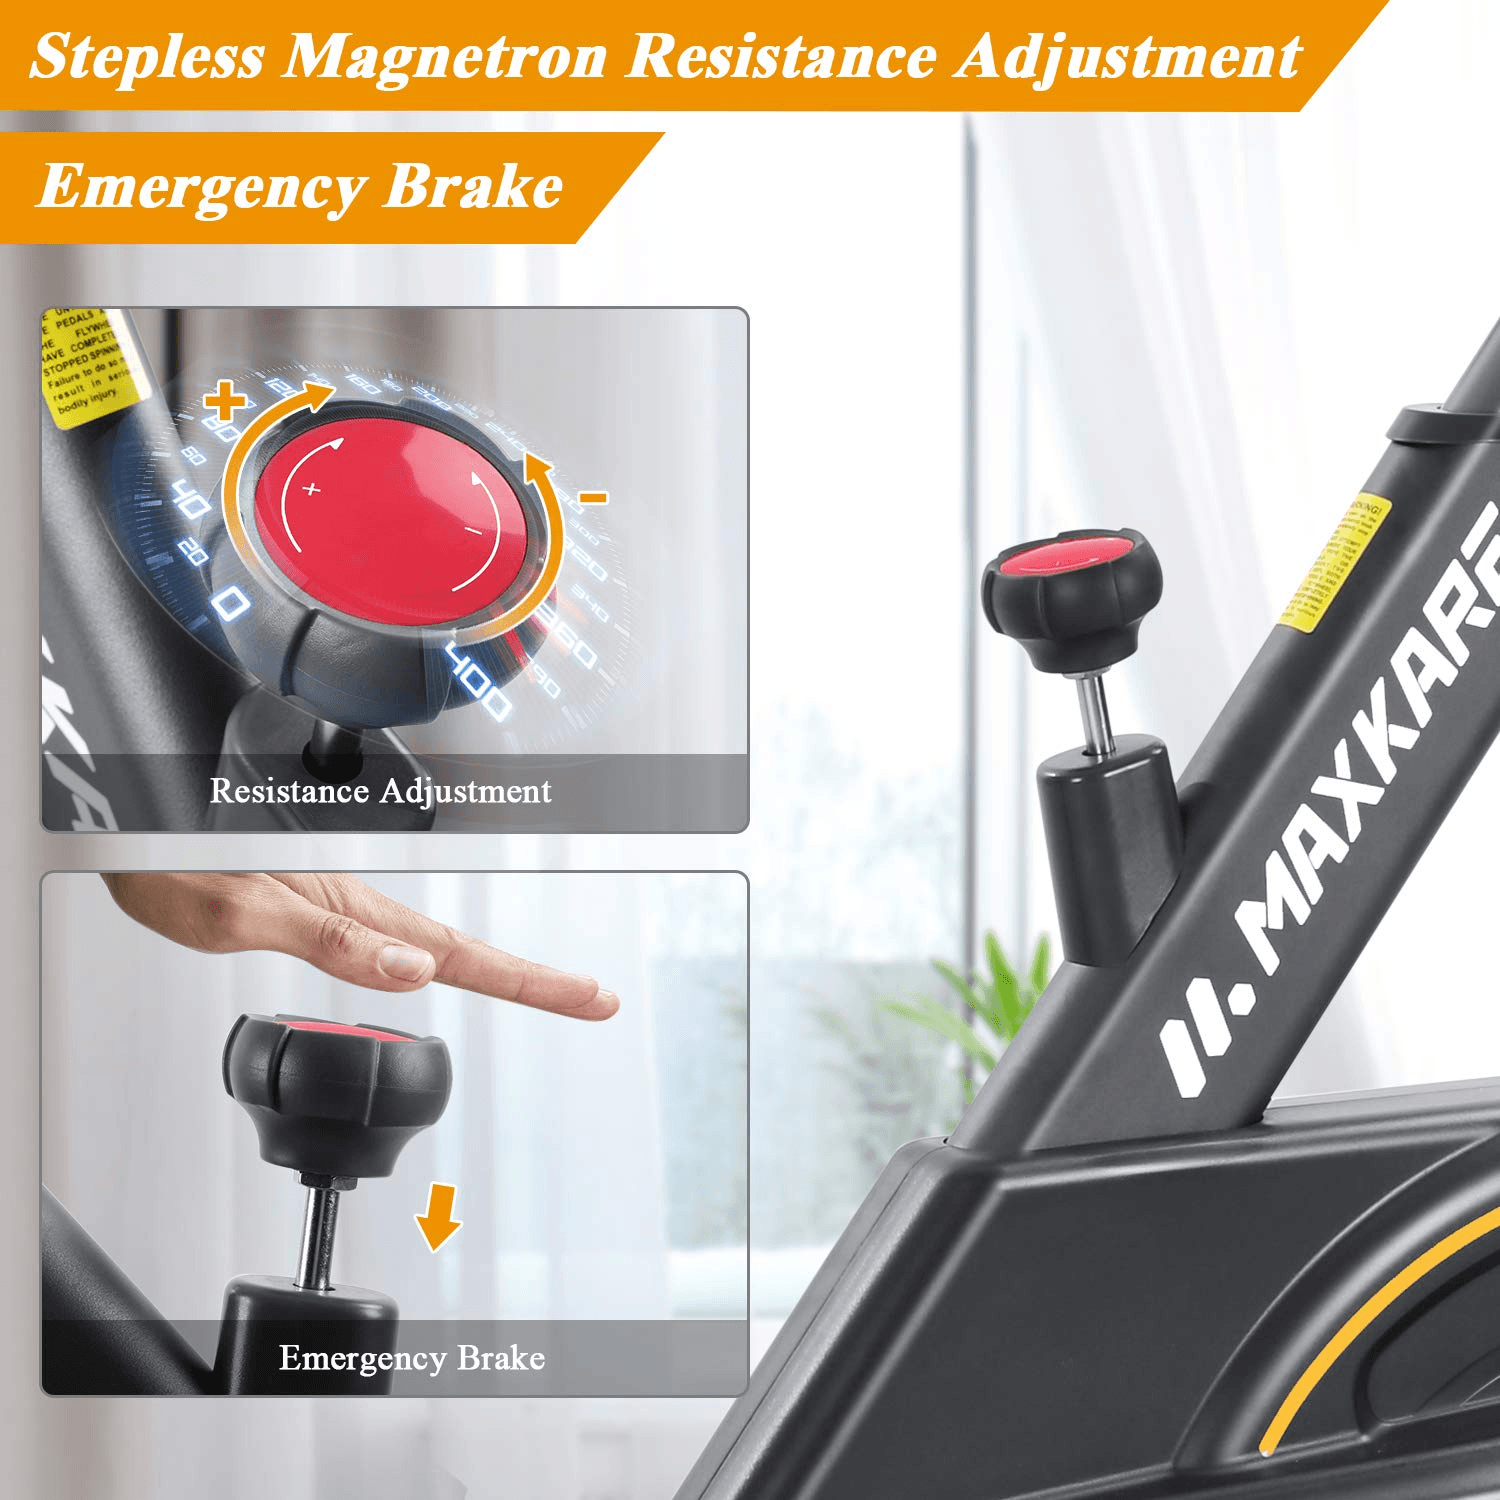 Load image into Gallery viewer, MaxKare Magnetic Cycling Bike, Multi-function Handle Stationary Bike with Independent Tablet Holder and LCD Monitor - NAIPO
